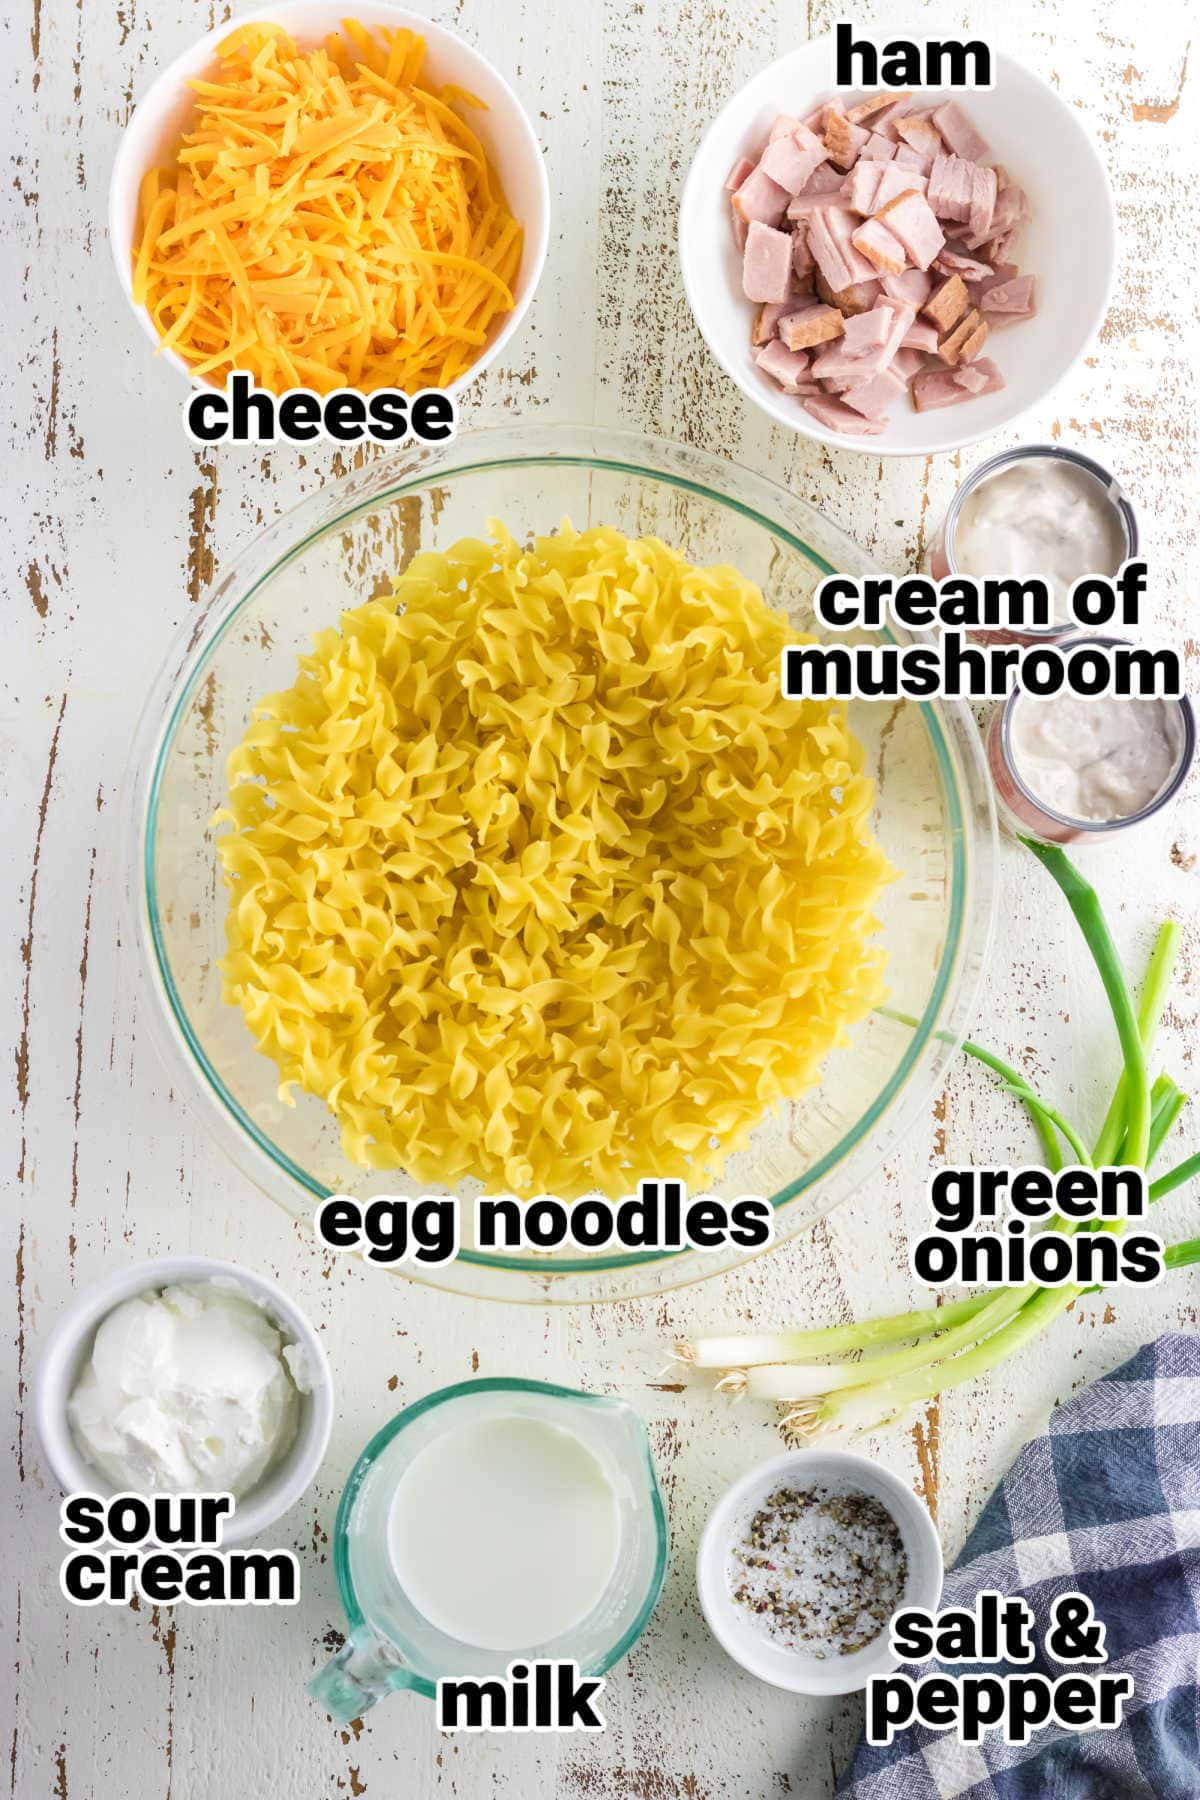 Labeled ingredients for ham and noodle casserole.